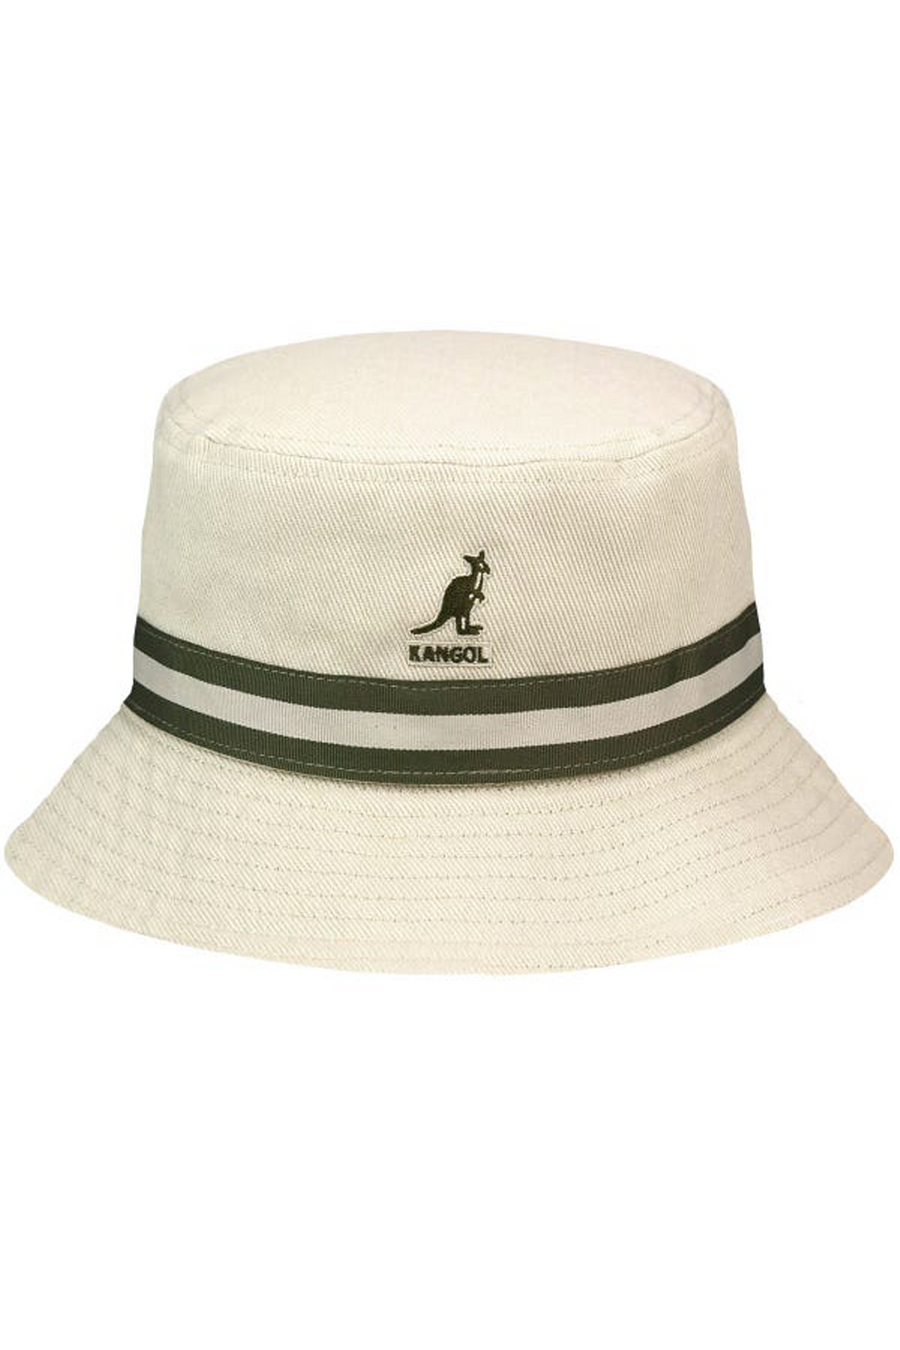 Buy the Kangol Stripe Lahinch Hat in Beige at Intro. Spend £50 for free UK delivery. Official stockists. We ship worldwide.